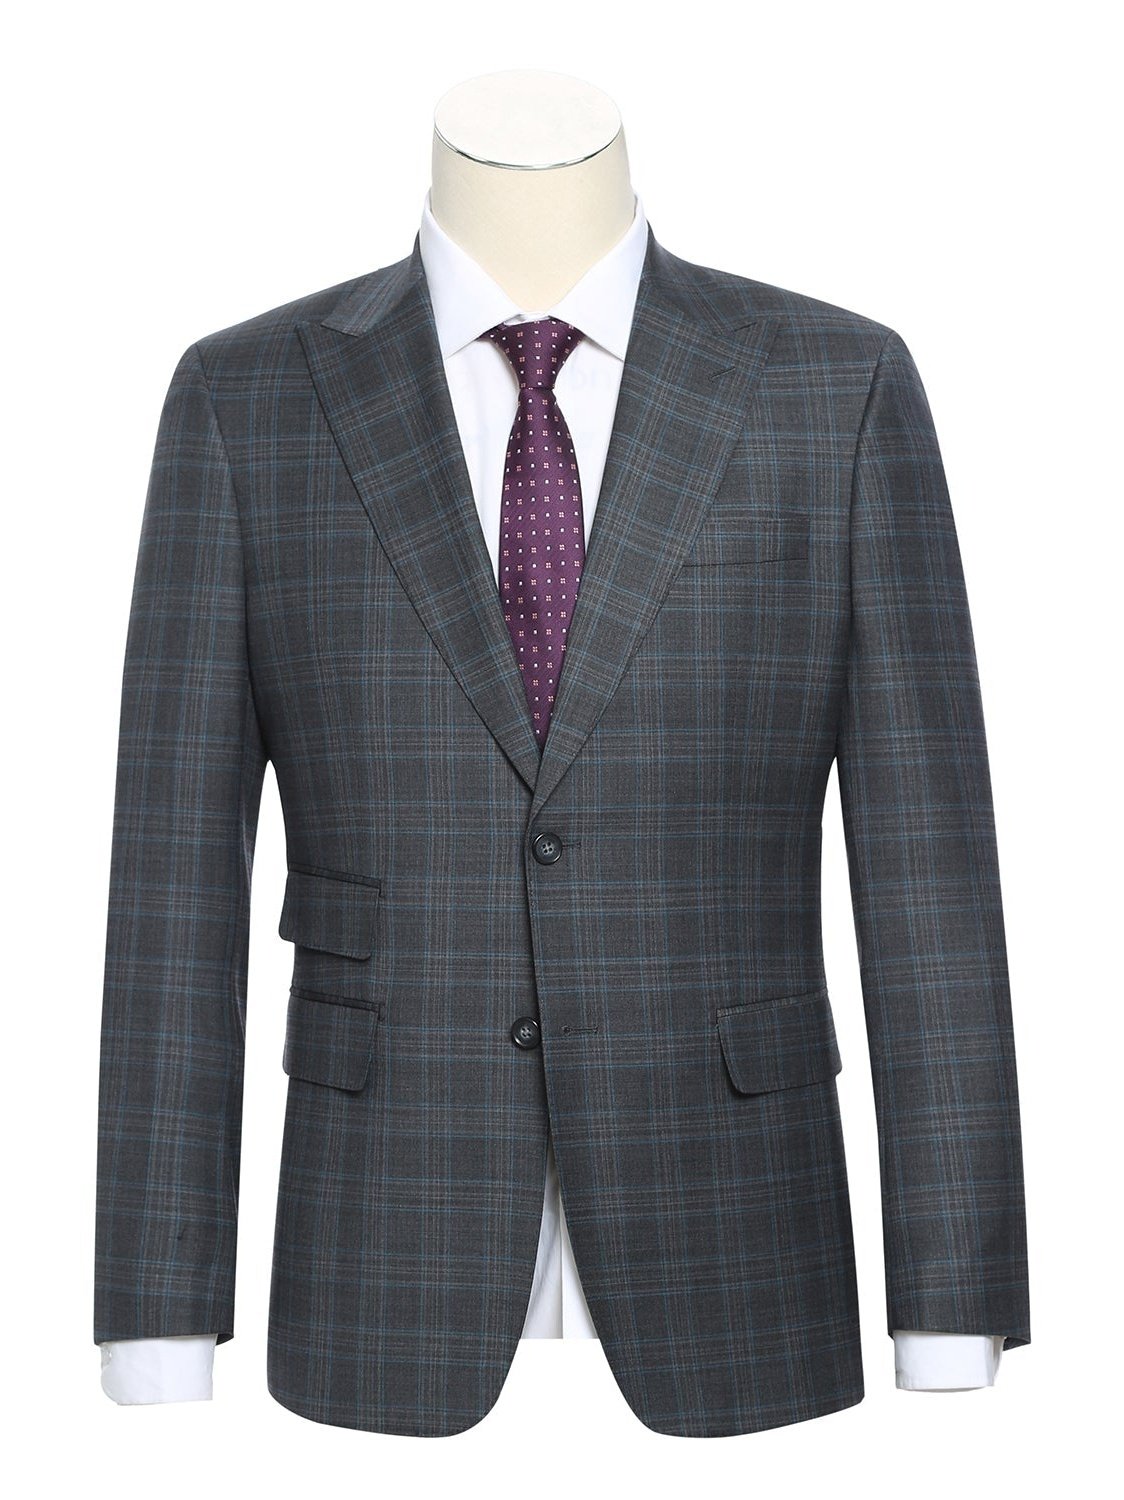 English Laundry Slim Fit Two Button Wool Gray Checked Peak Lapel Suit